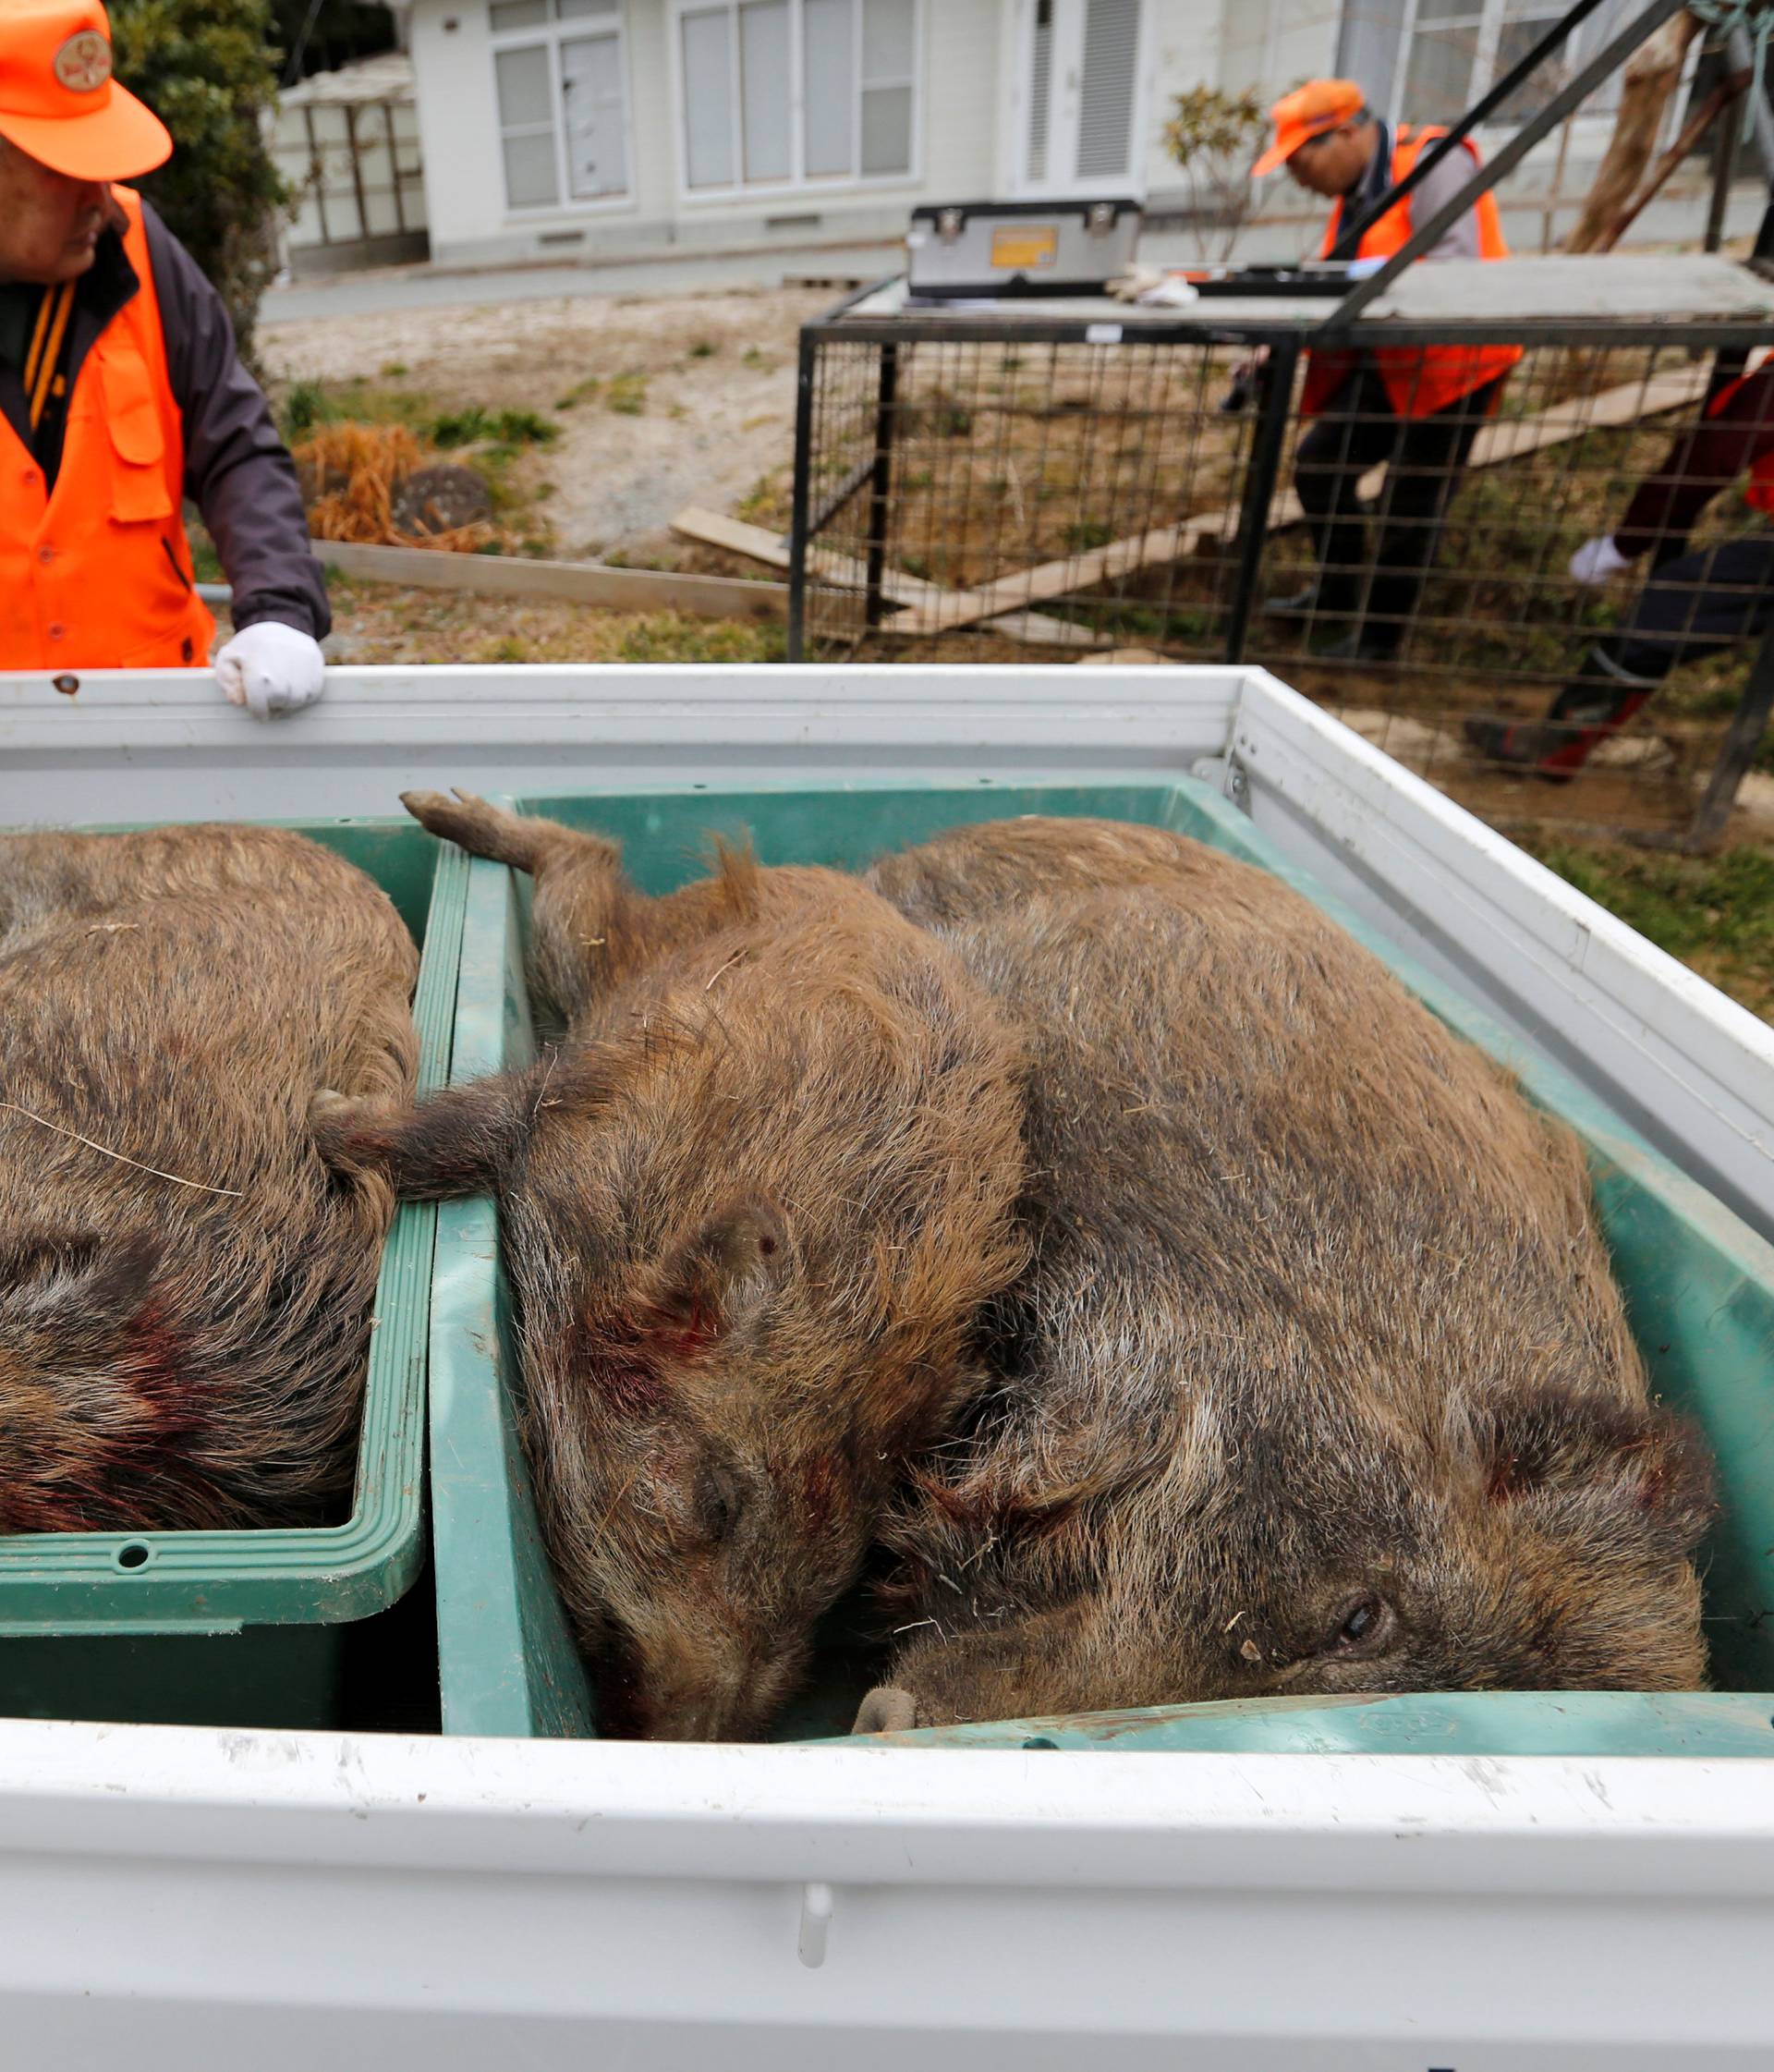 Wild boars which killed by a pellet gun in a booby trap, are seen on a truck at a residential area in an evacuation zone near TEPCO's tsunami-crippled Fukushima Daiichi nuclear power plant in Tomioka town